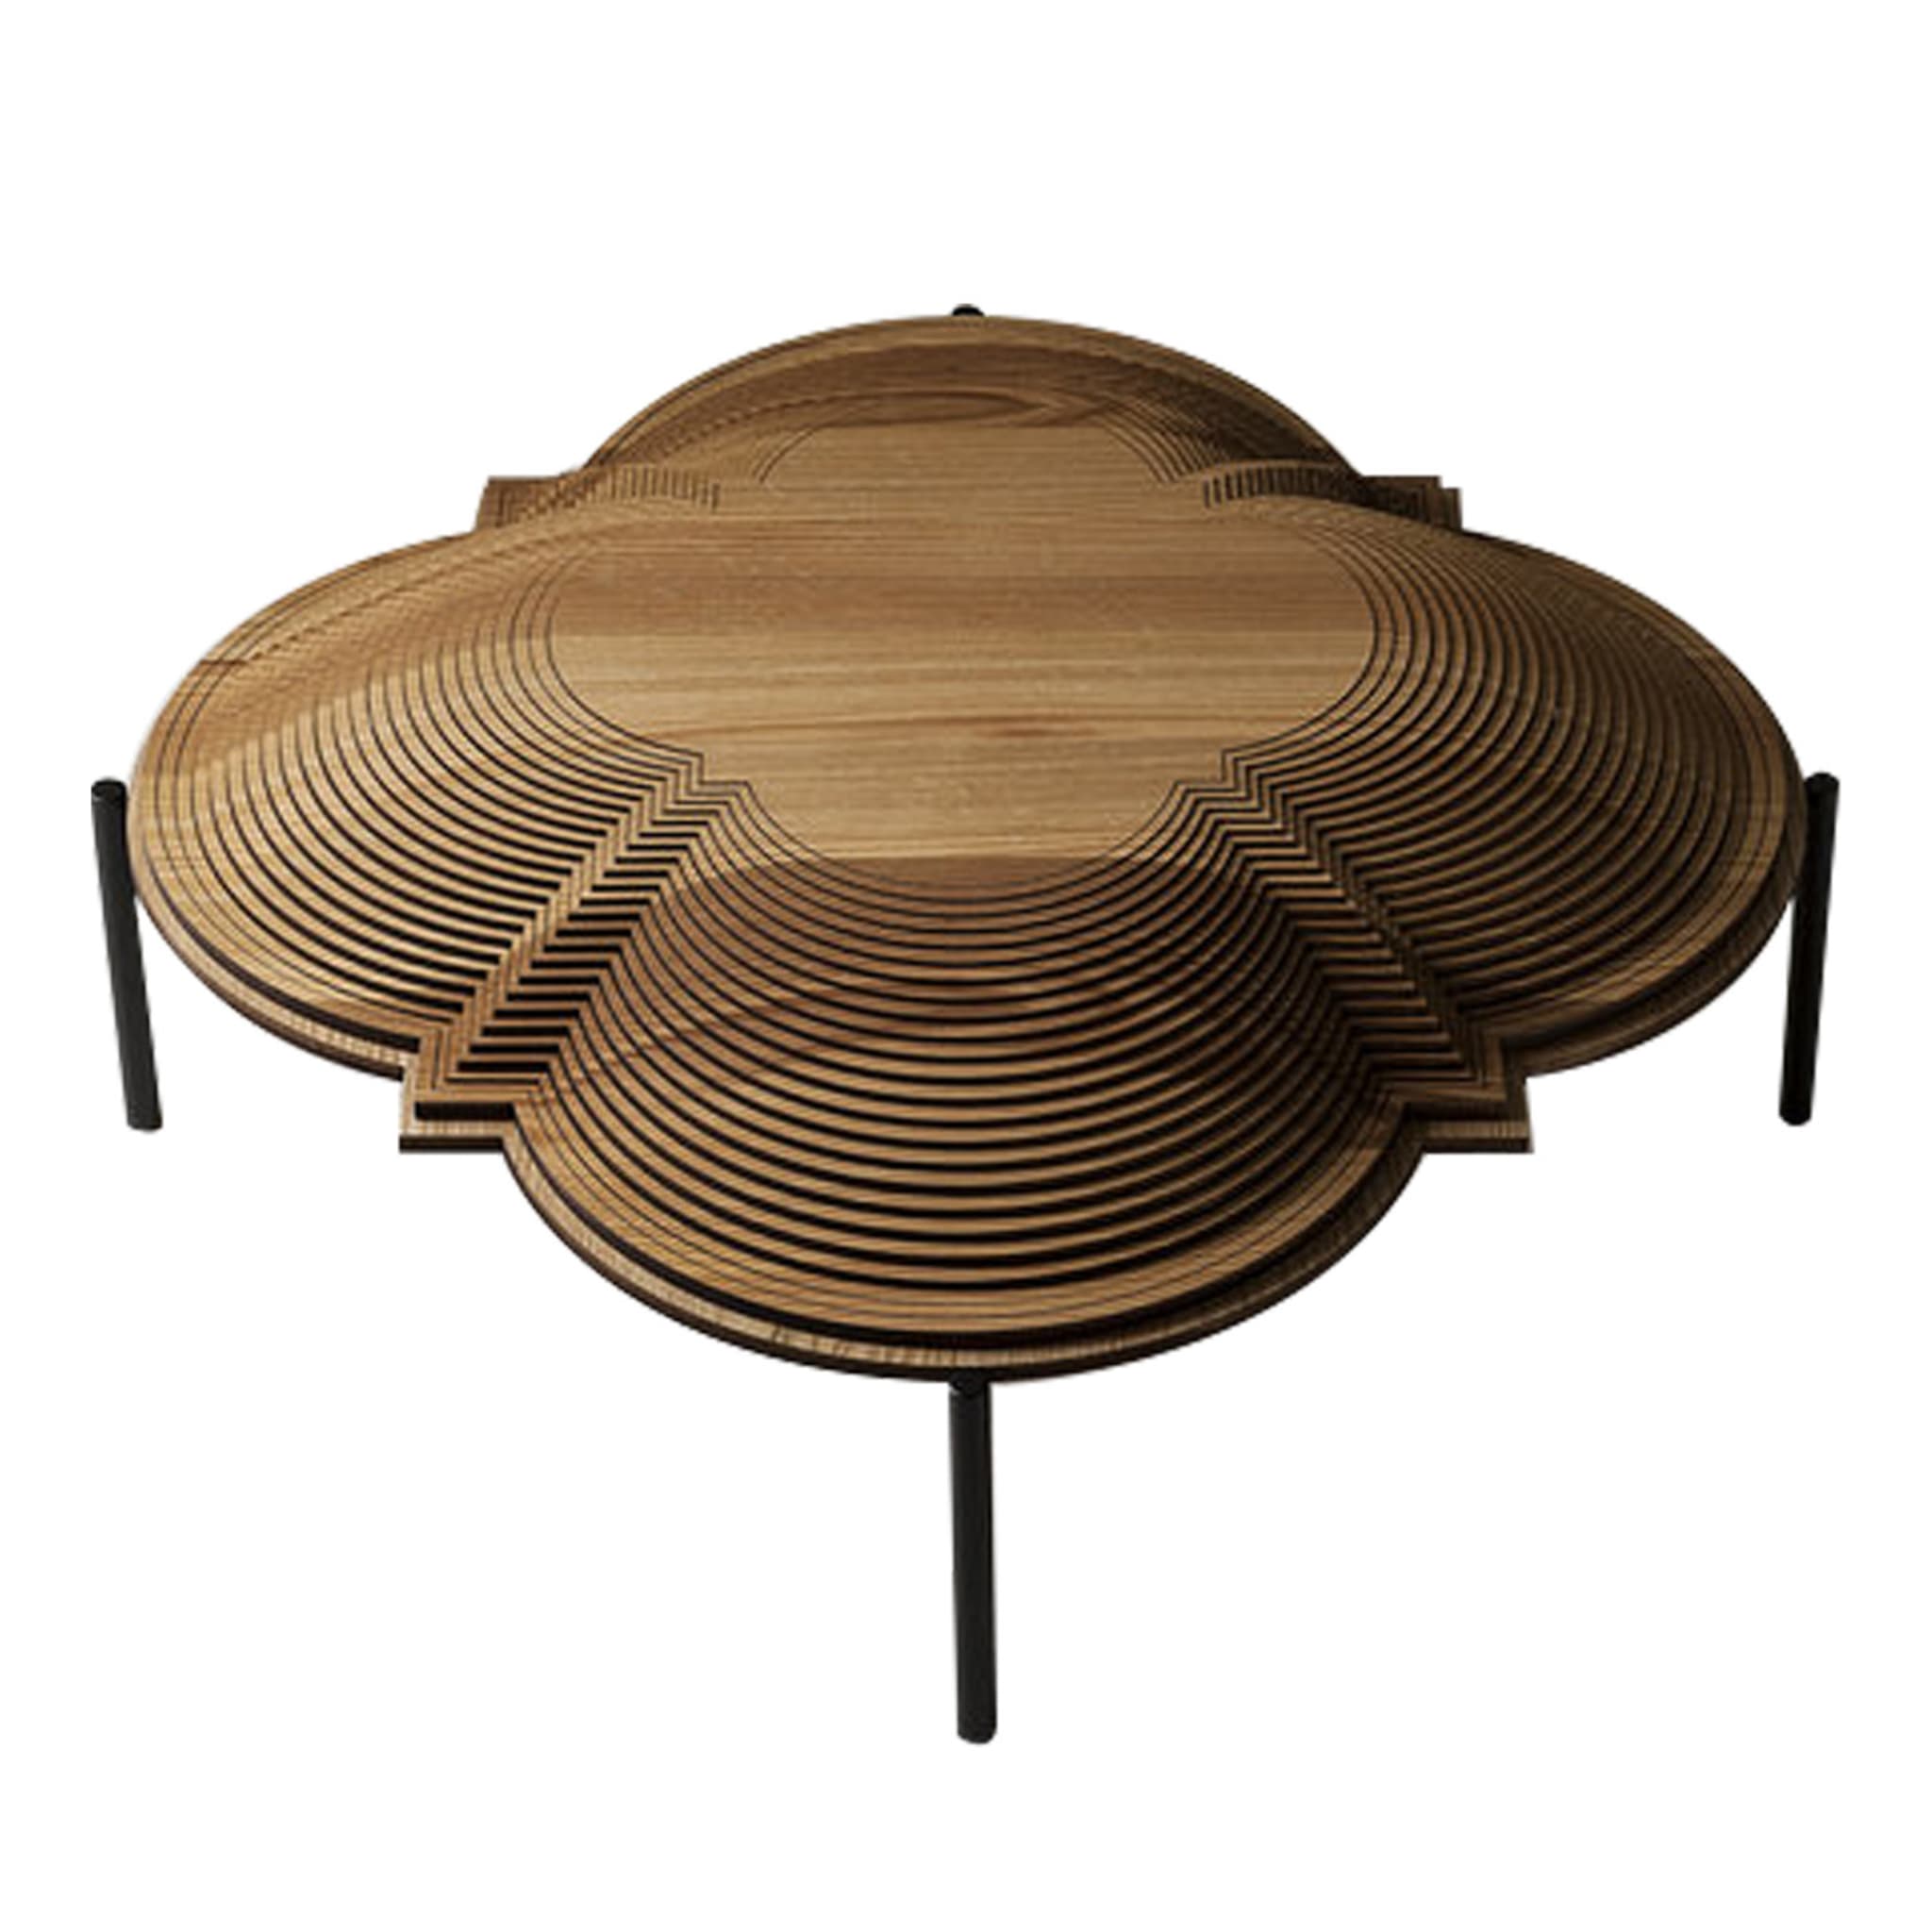 Dome 1 Coffee Table - Main view